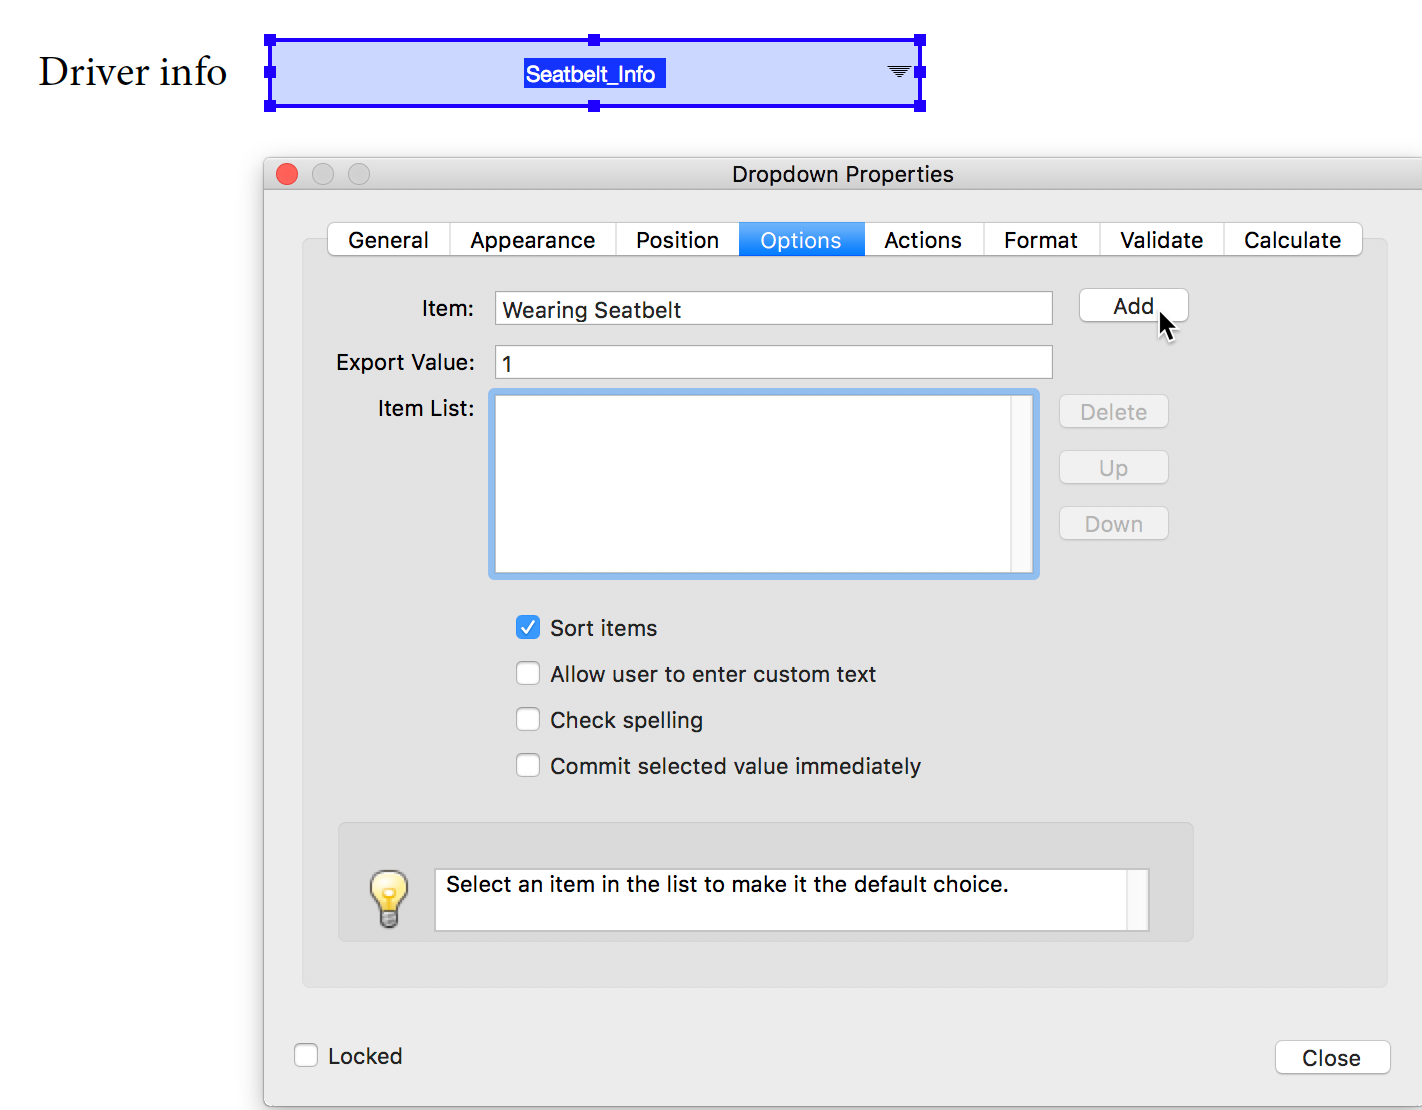 Select "About Adobe Acrobat" from the drop-down menu.
Check the version number displayed.